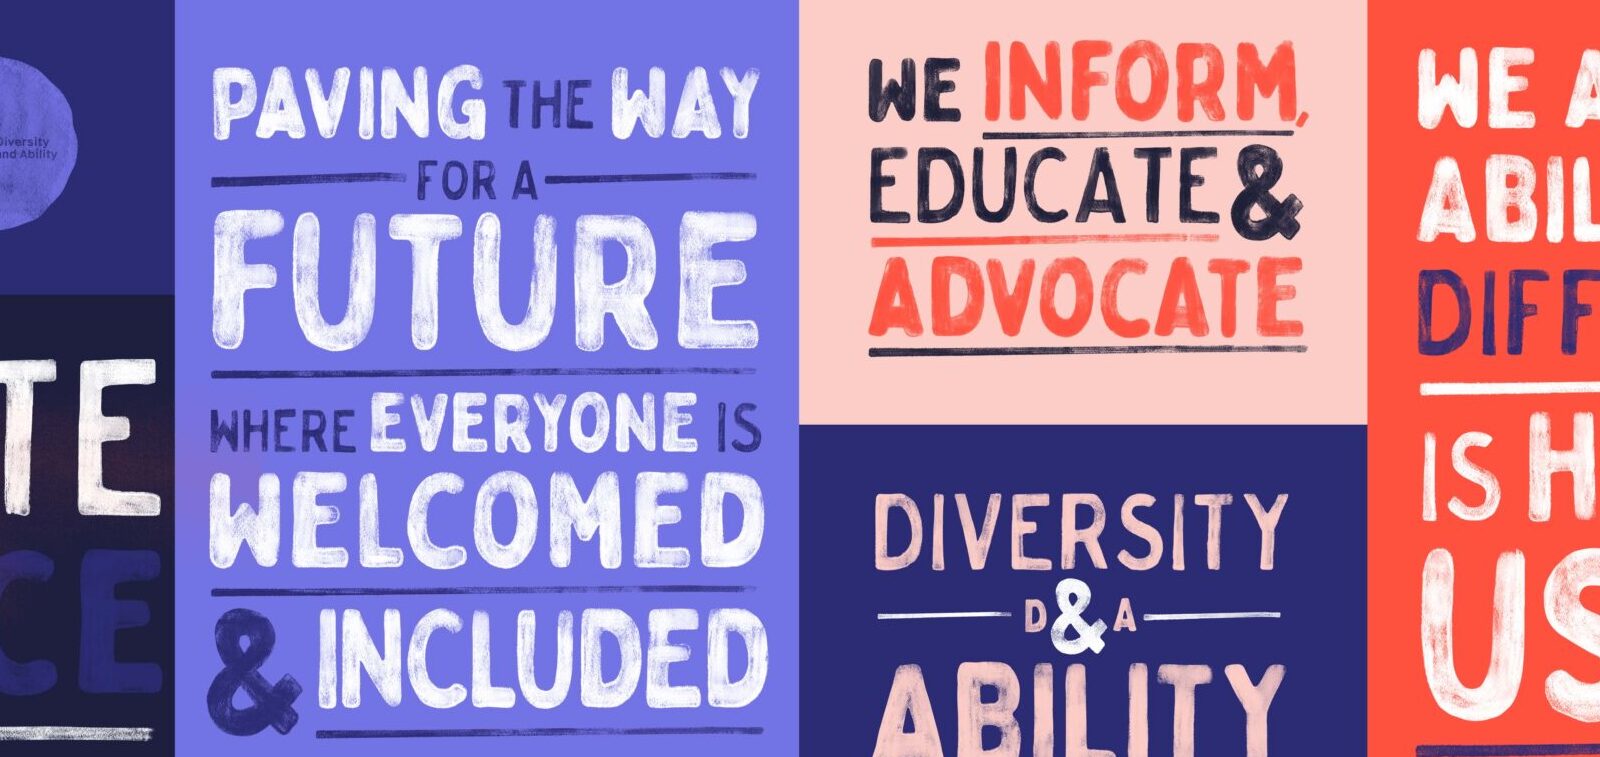 Diversity and Ability footer icons, showing d and a logo and slogan, 'we inform, educate and advocate'.